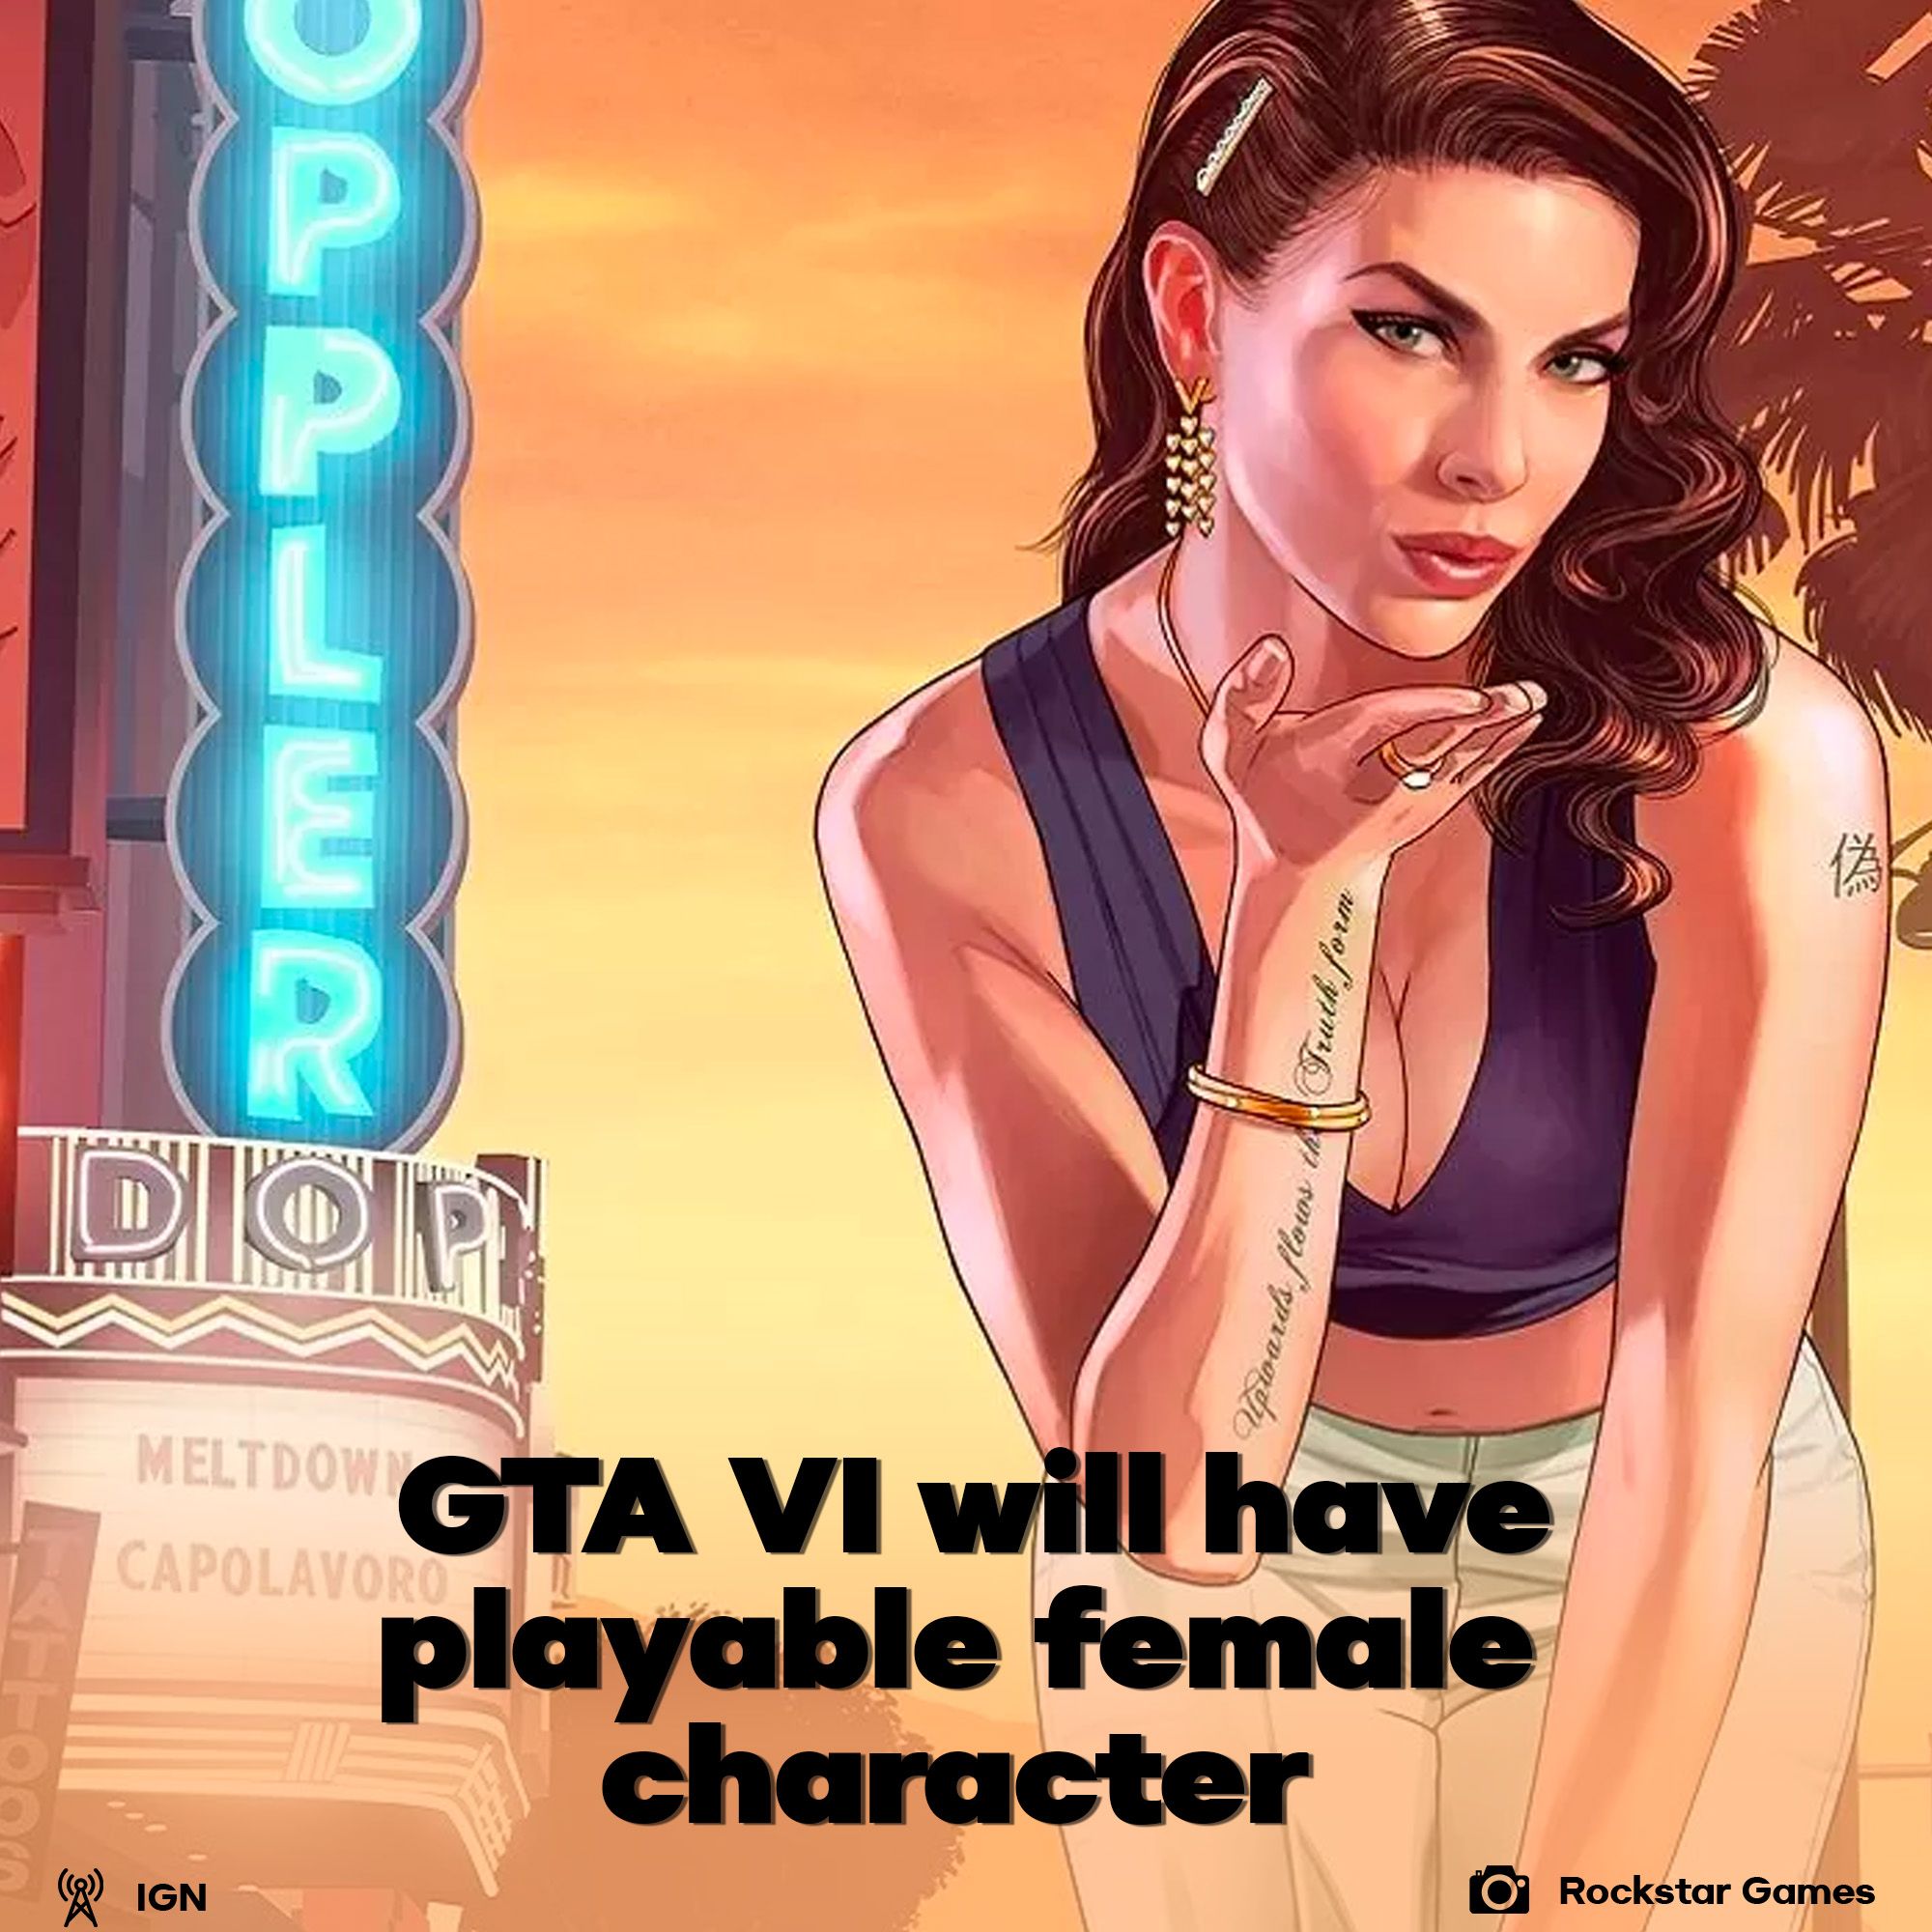 GTA 6 with female protagonist